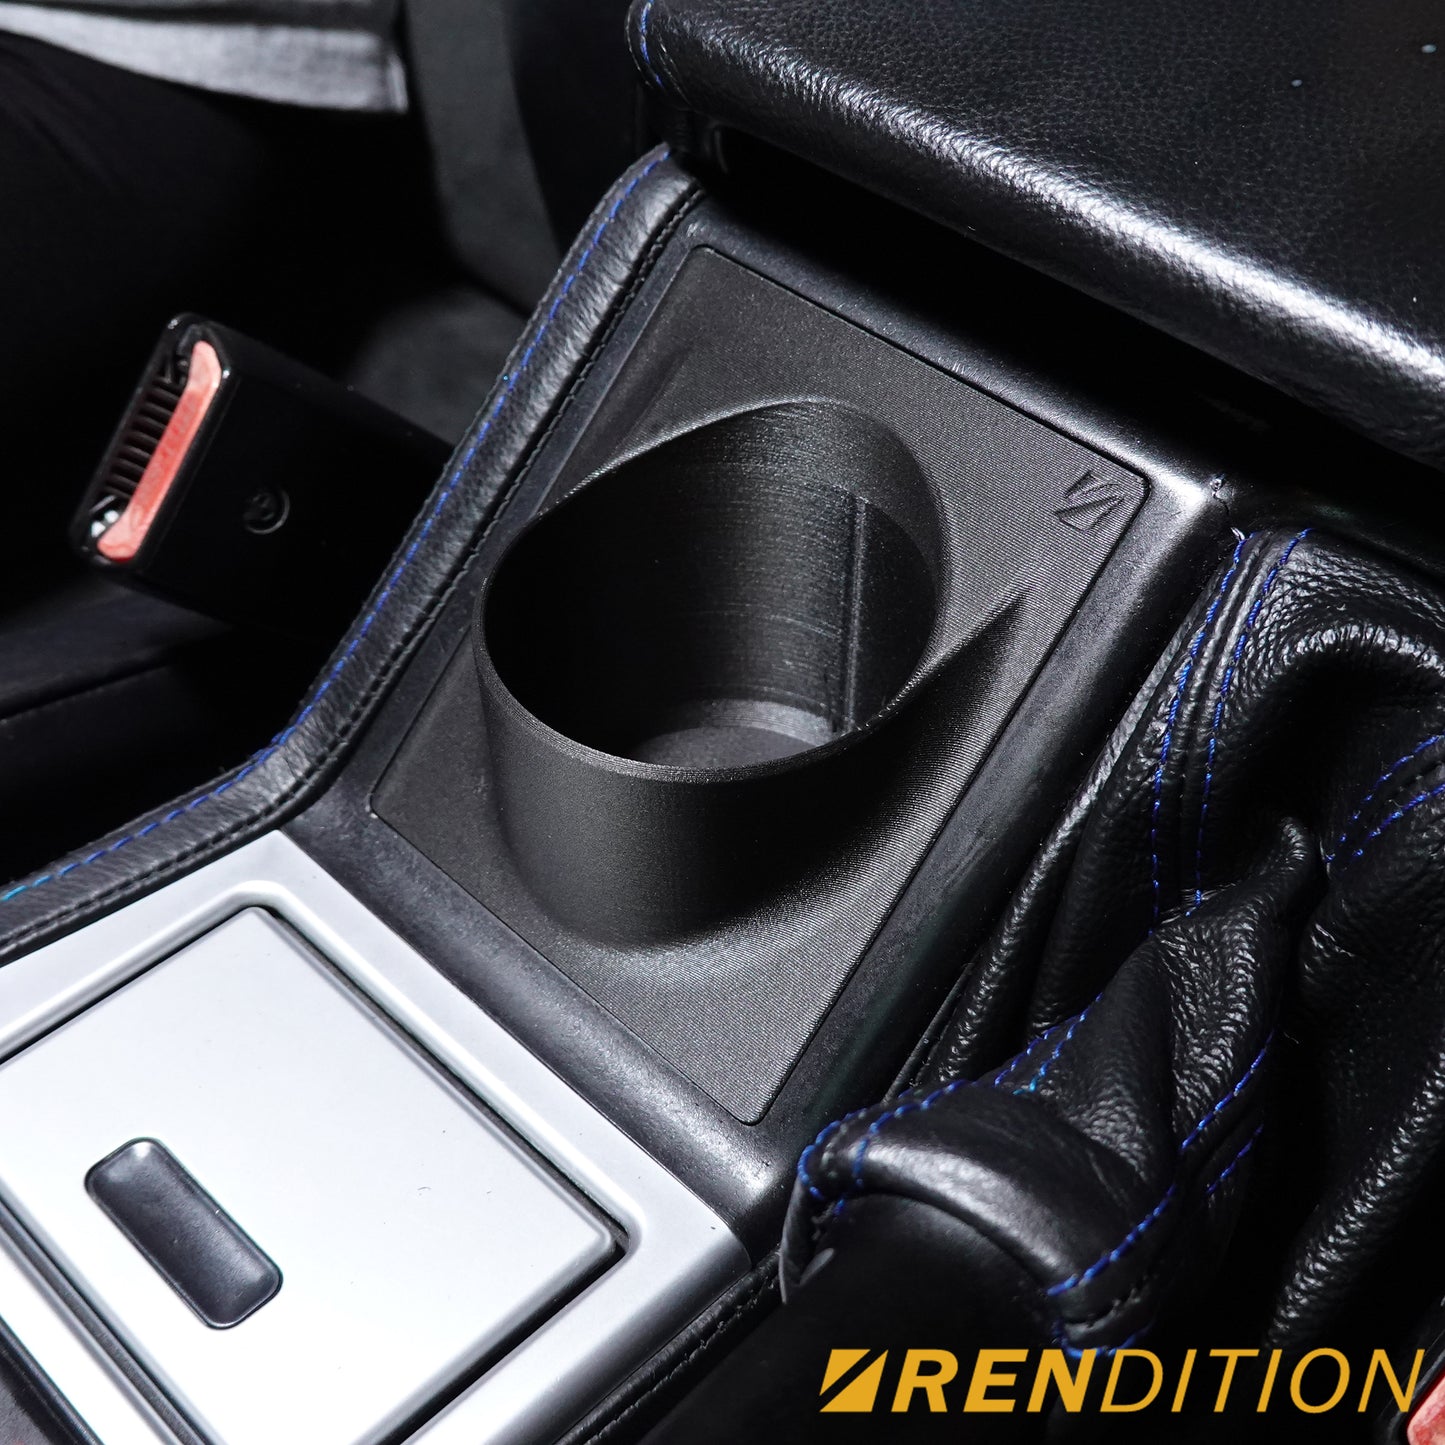 BMW 5 series E39 Cup Holder Can be wrapped in carbon fibre -  Österreich